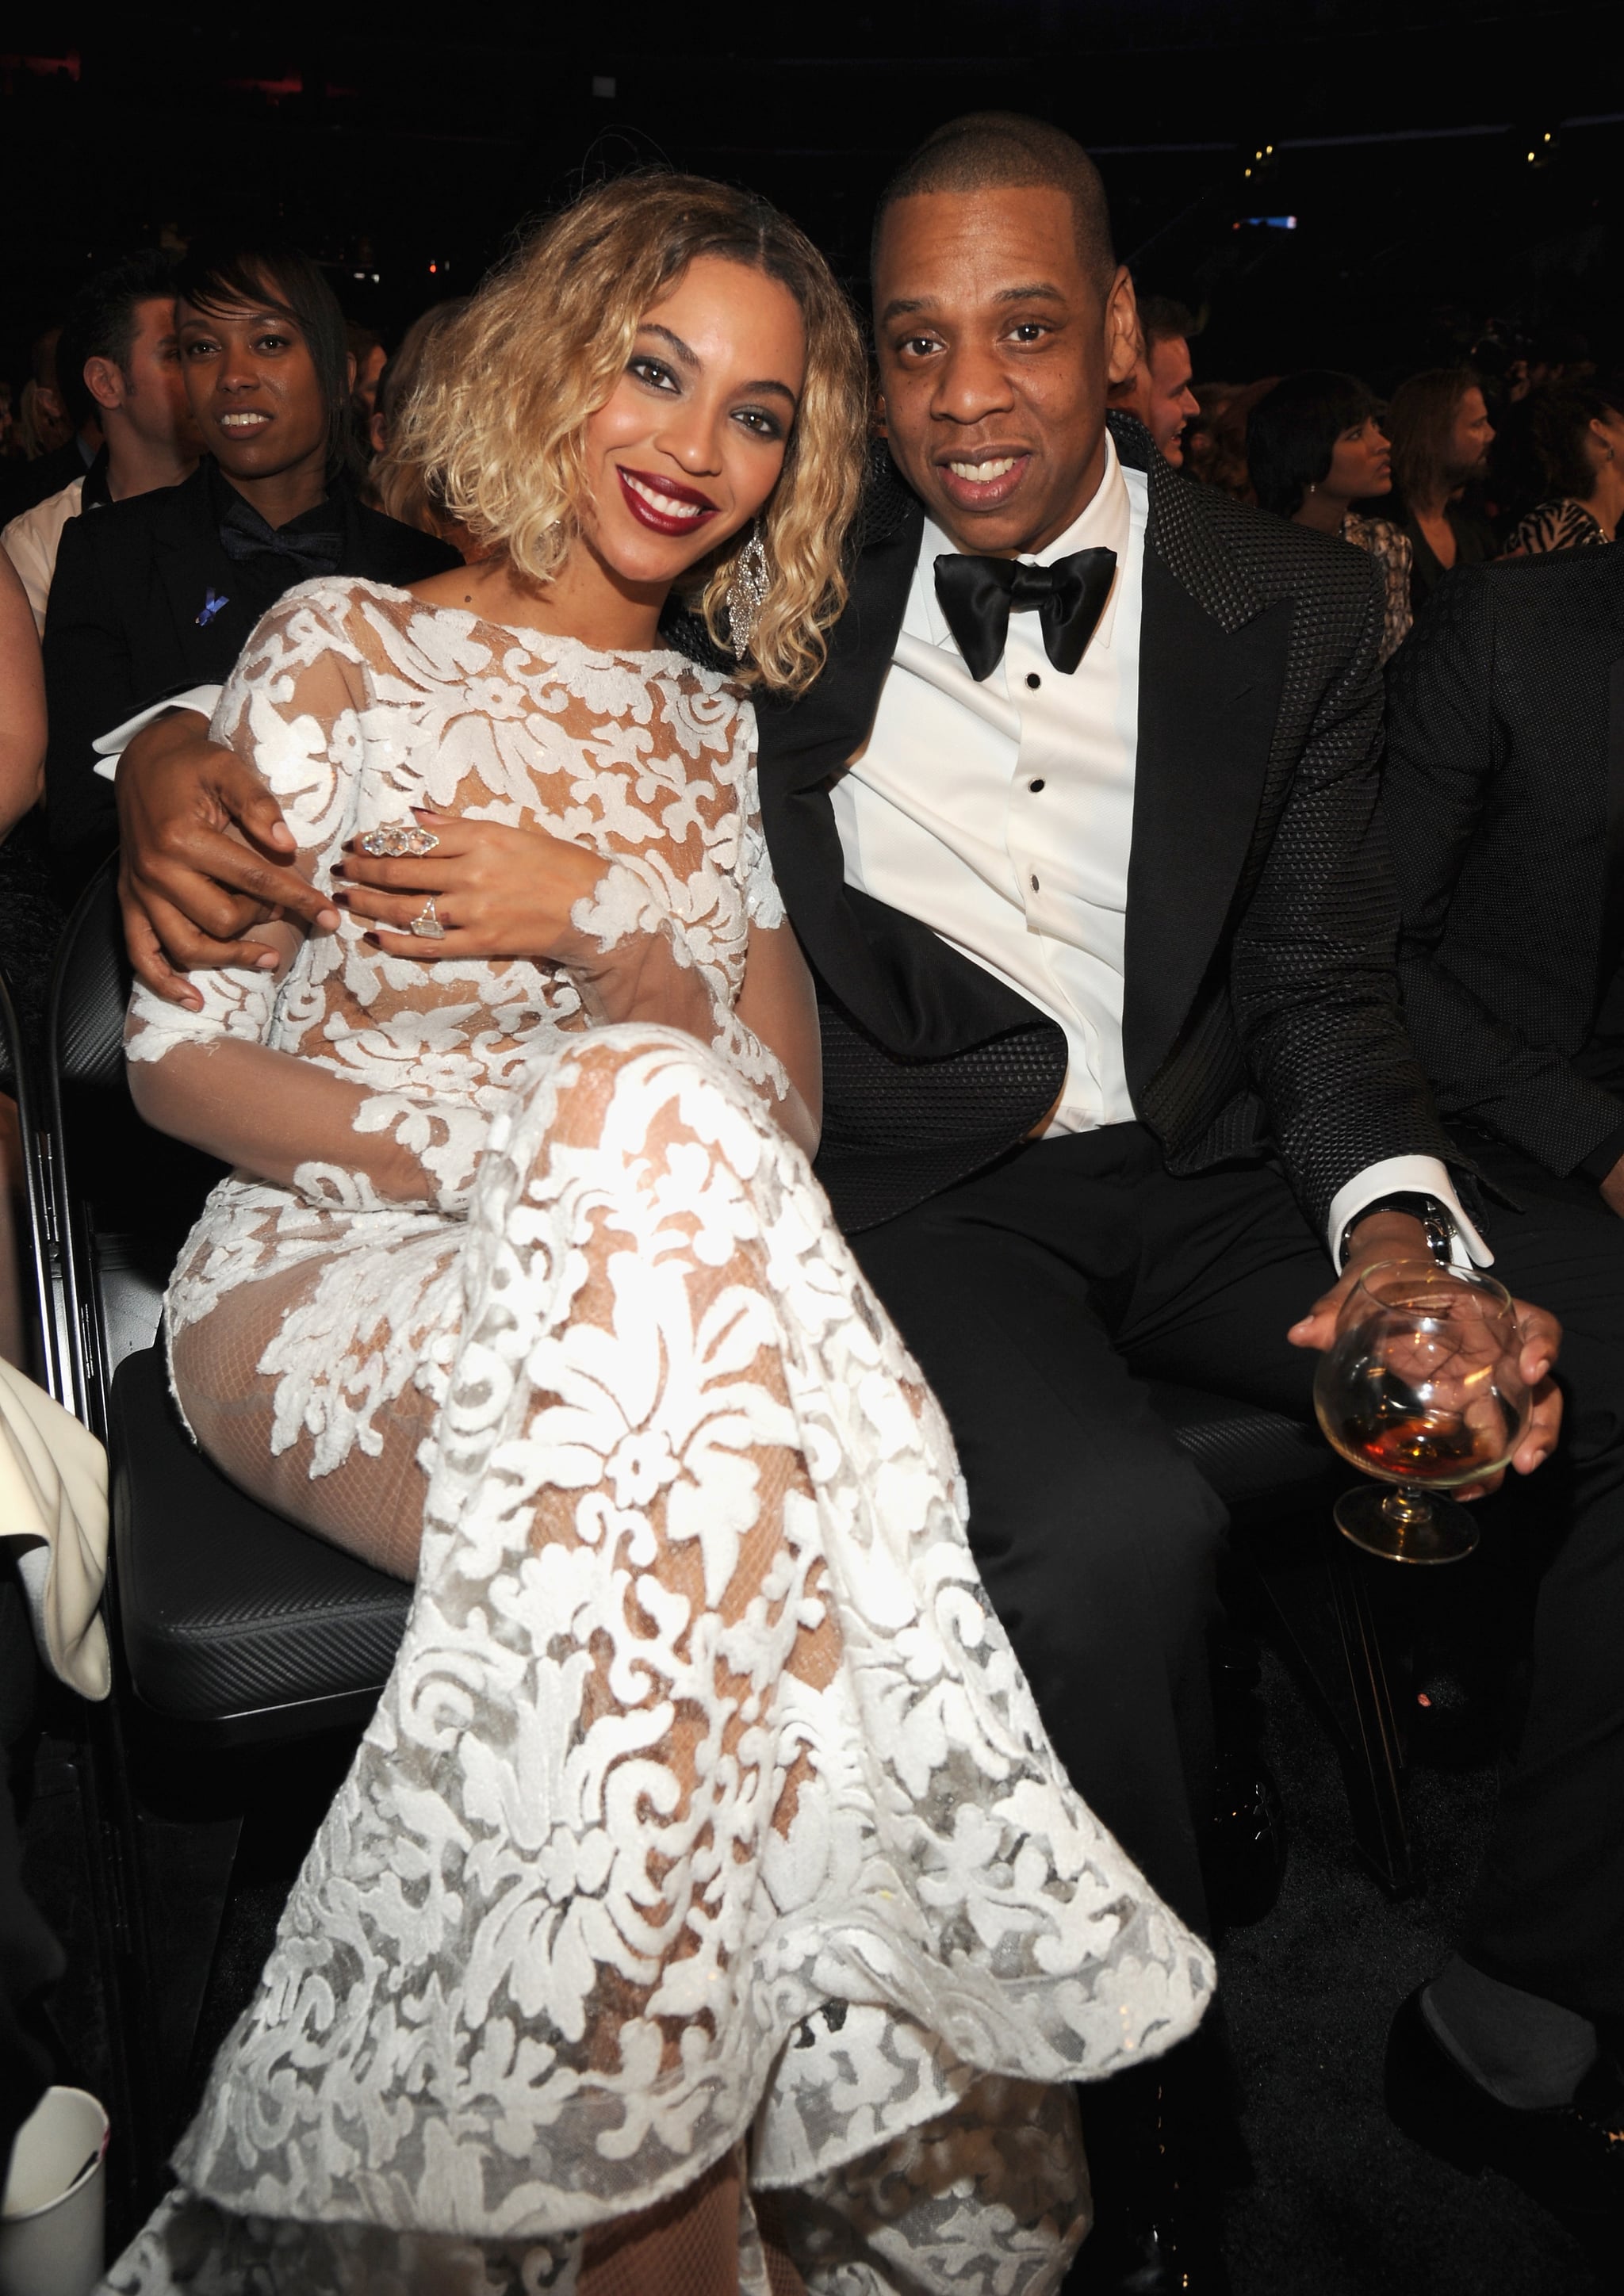 Jay Z and Beyoncé sat together during the Grammys. The Very Best